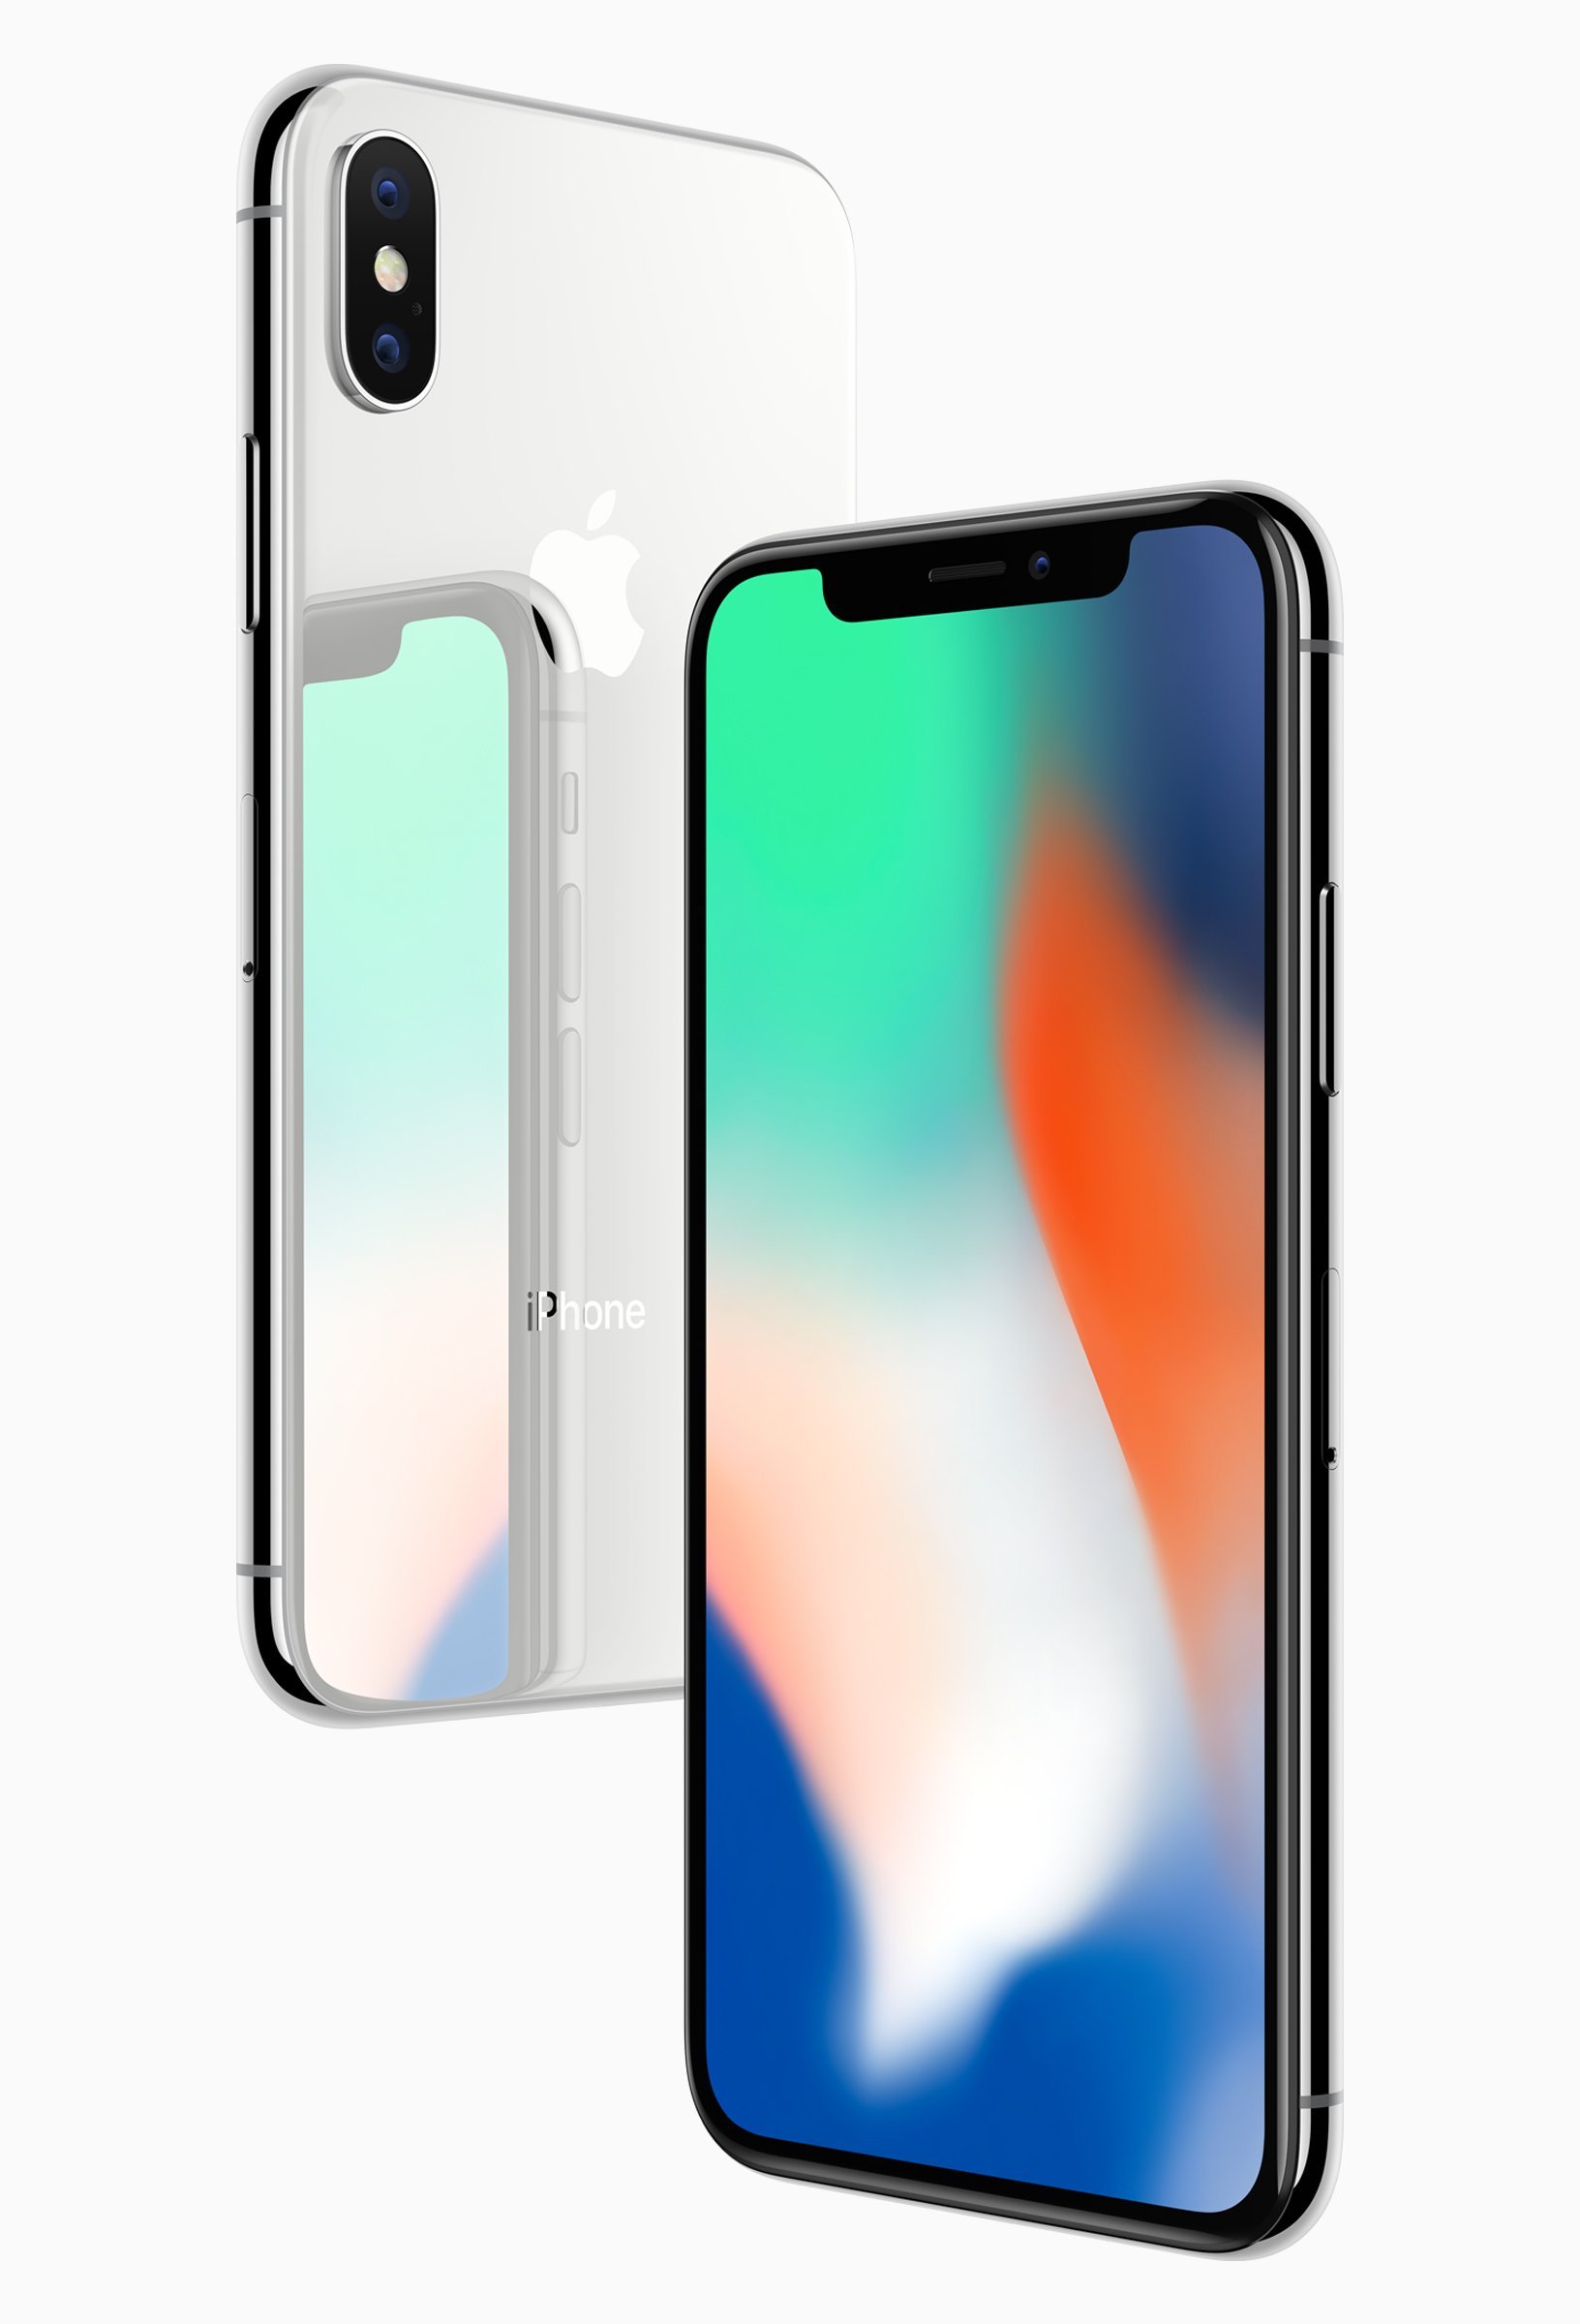 Apple revealed the new iPhone X on Tuesday, September 12, 2017 for the tenth anniversary of the original iPhone.